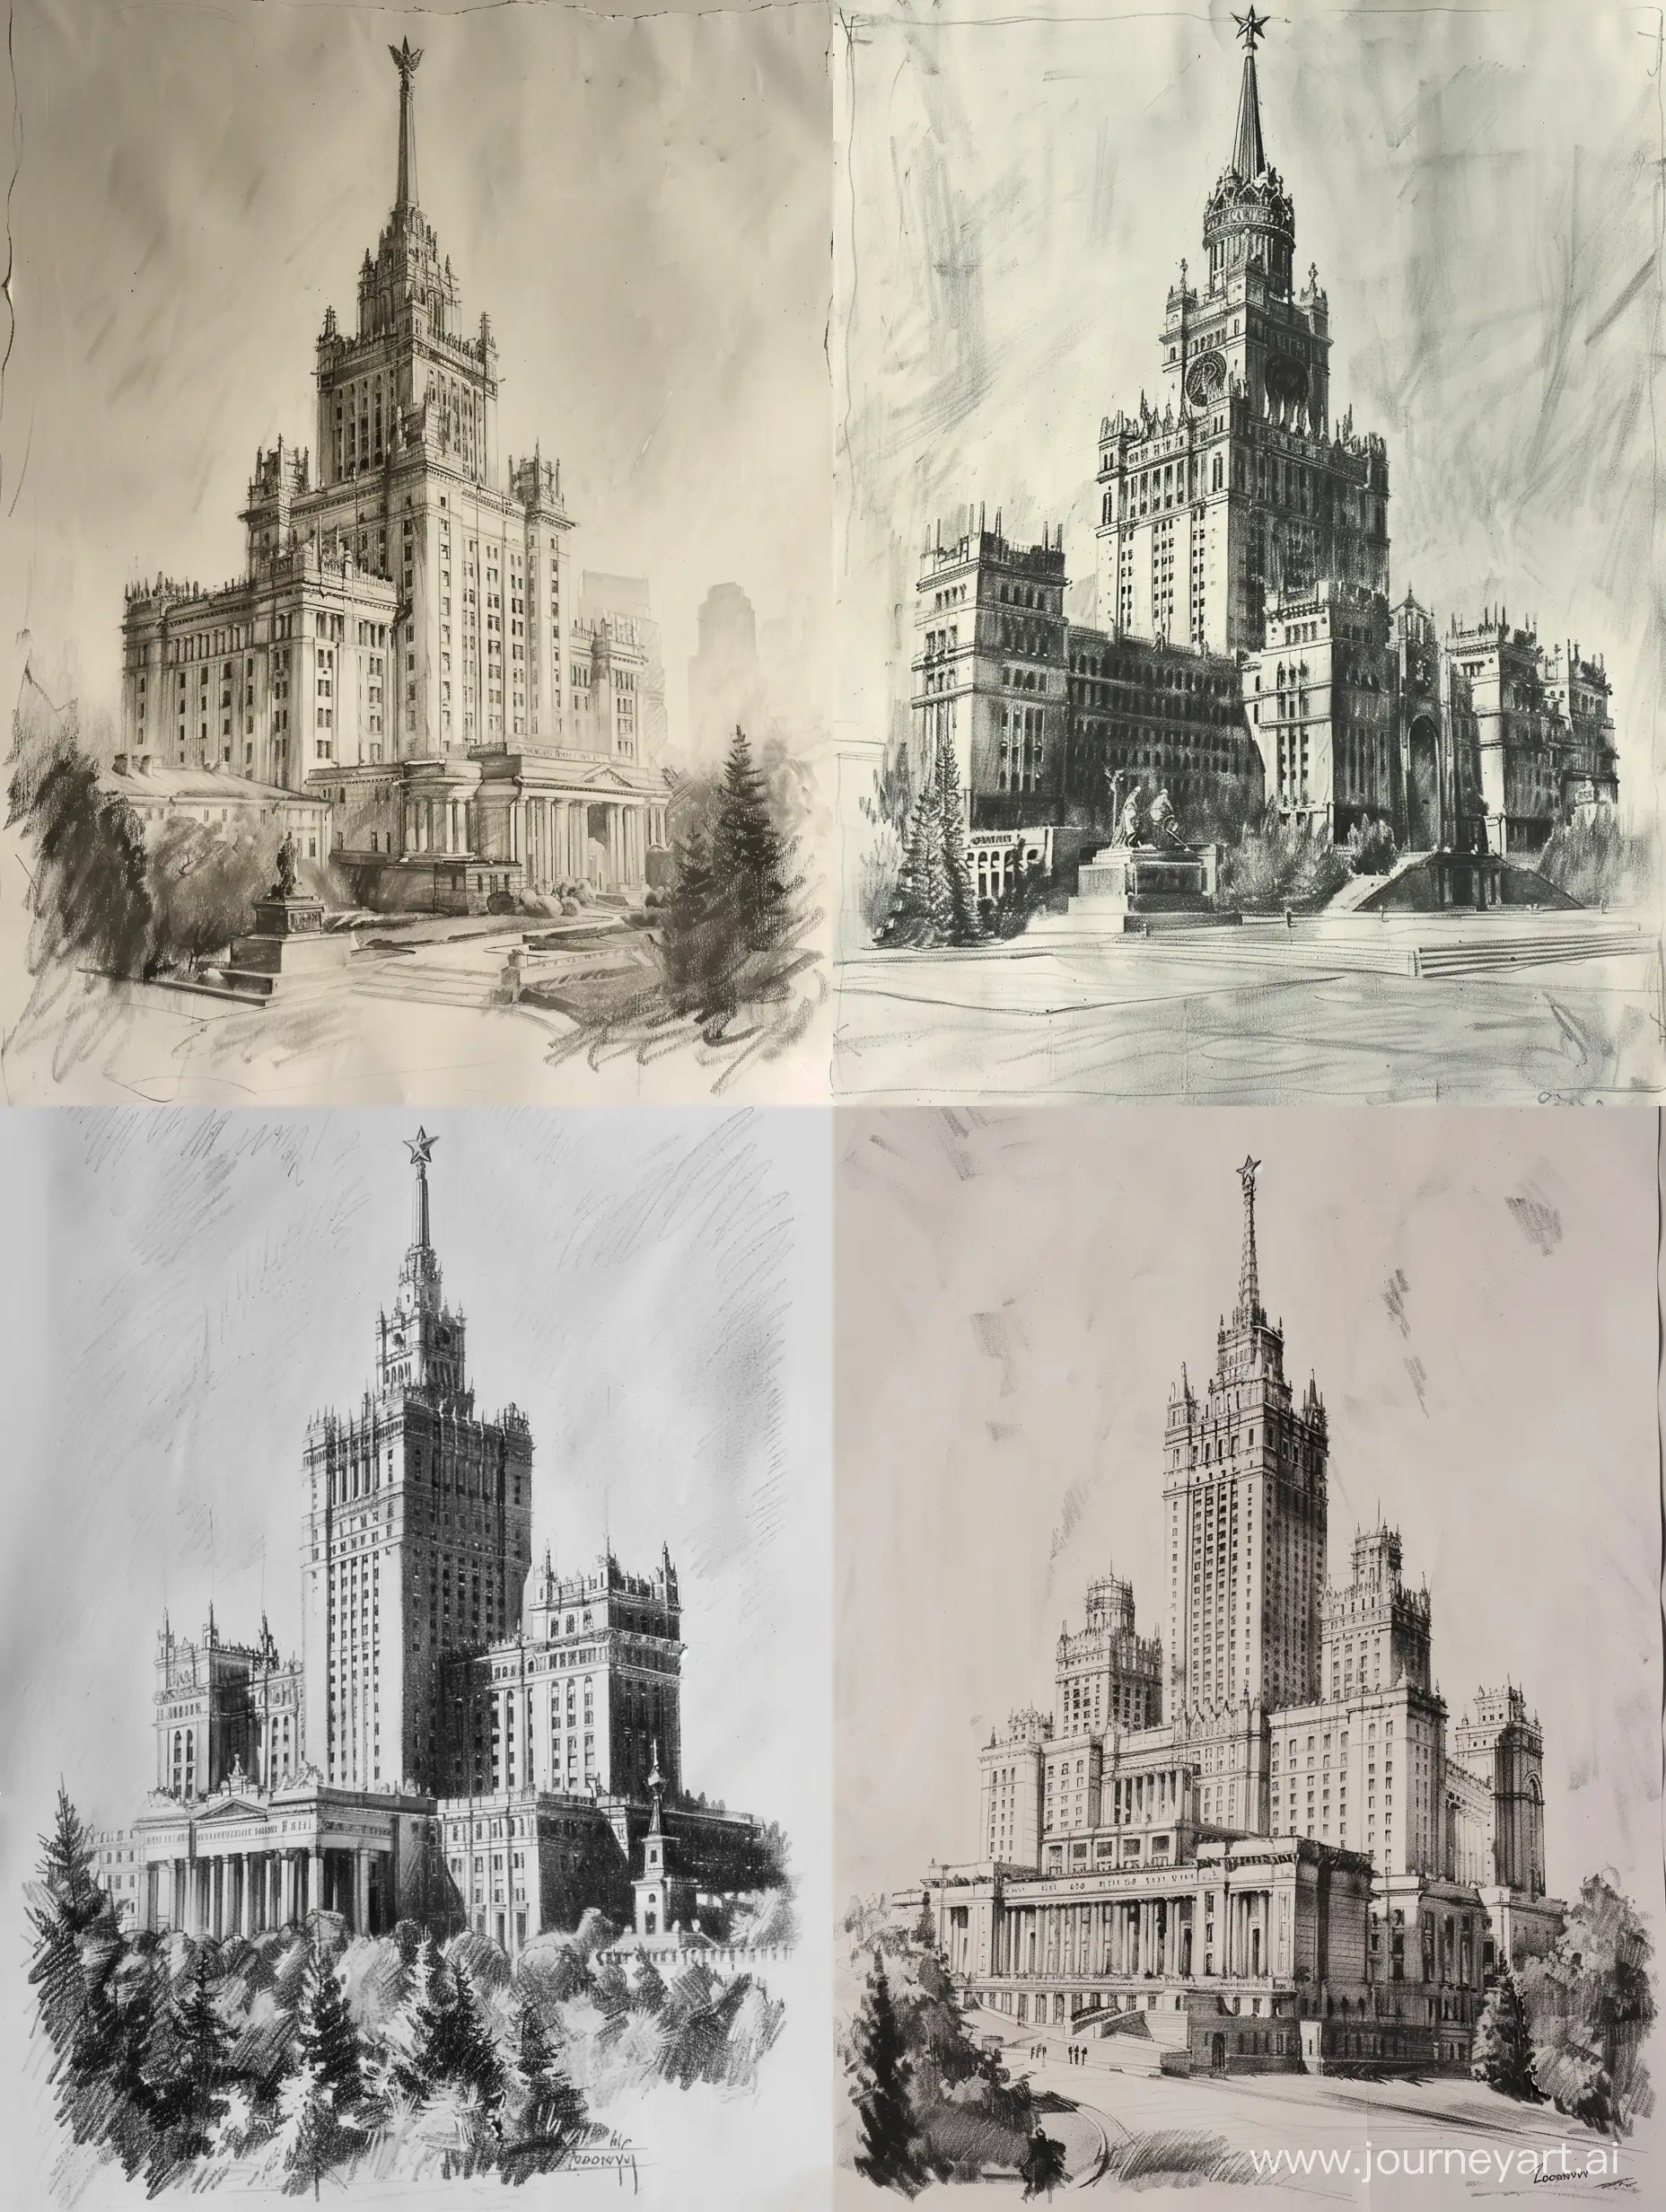 Stunning-Charcoal-Drawing-Moscow-State-University-on-Sparrow-Hills-in-Stalinist-Empire-Style